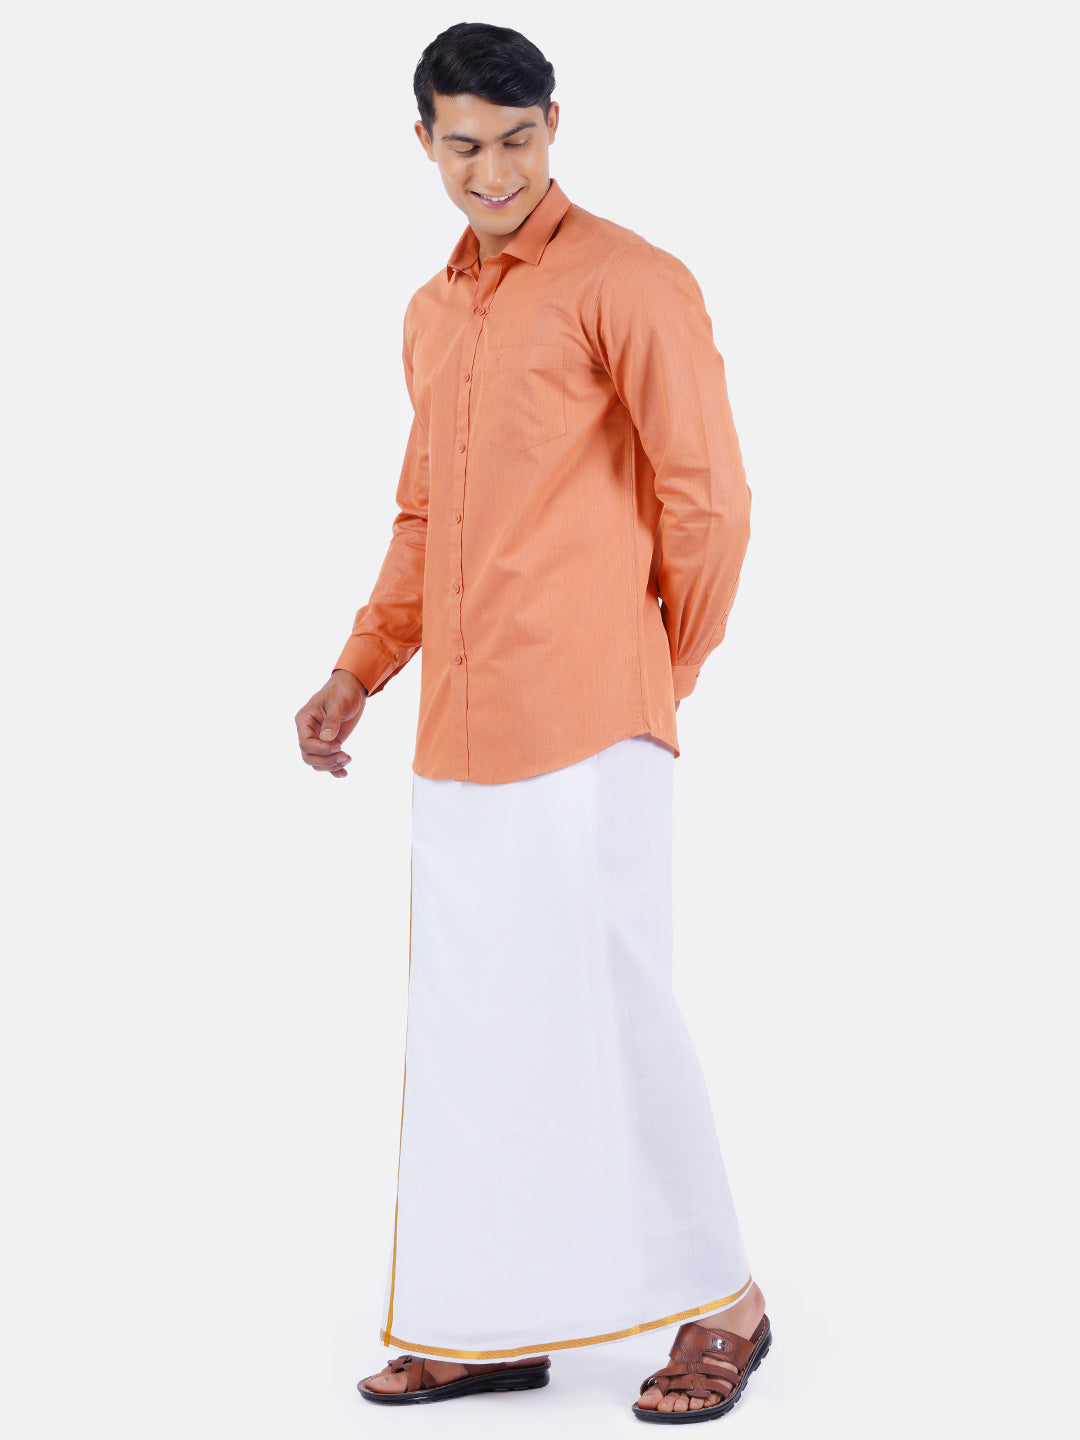 Mens Cotton Colour Full Sleeves Shirt with Jari Dhoti Plus Size Combo-Side view